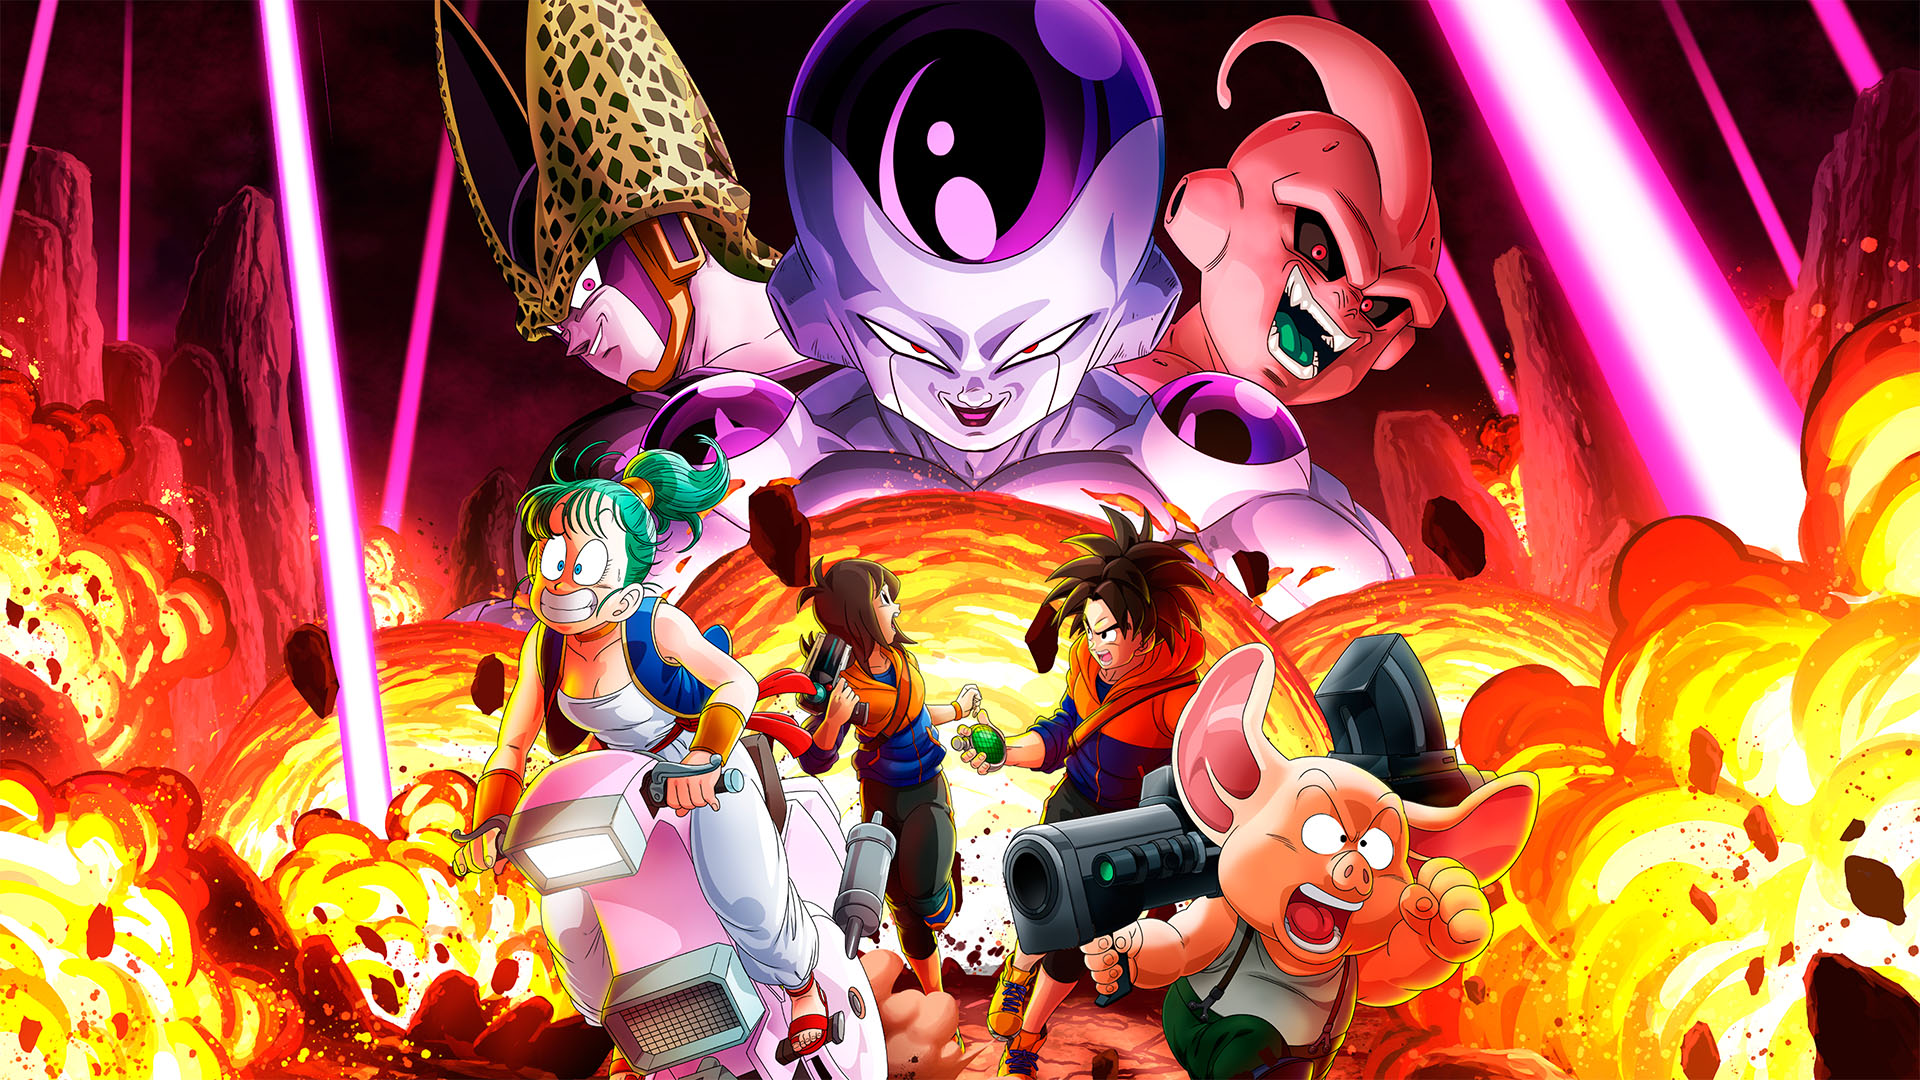 Exciting News for Anime Fans: Dragon Ball Daima's Global Launch, Episode Details, and More from Toei Animation’s Insider